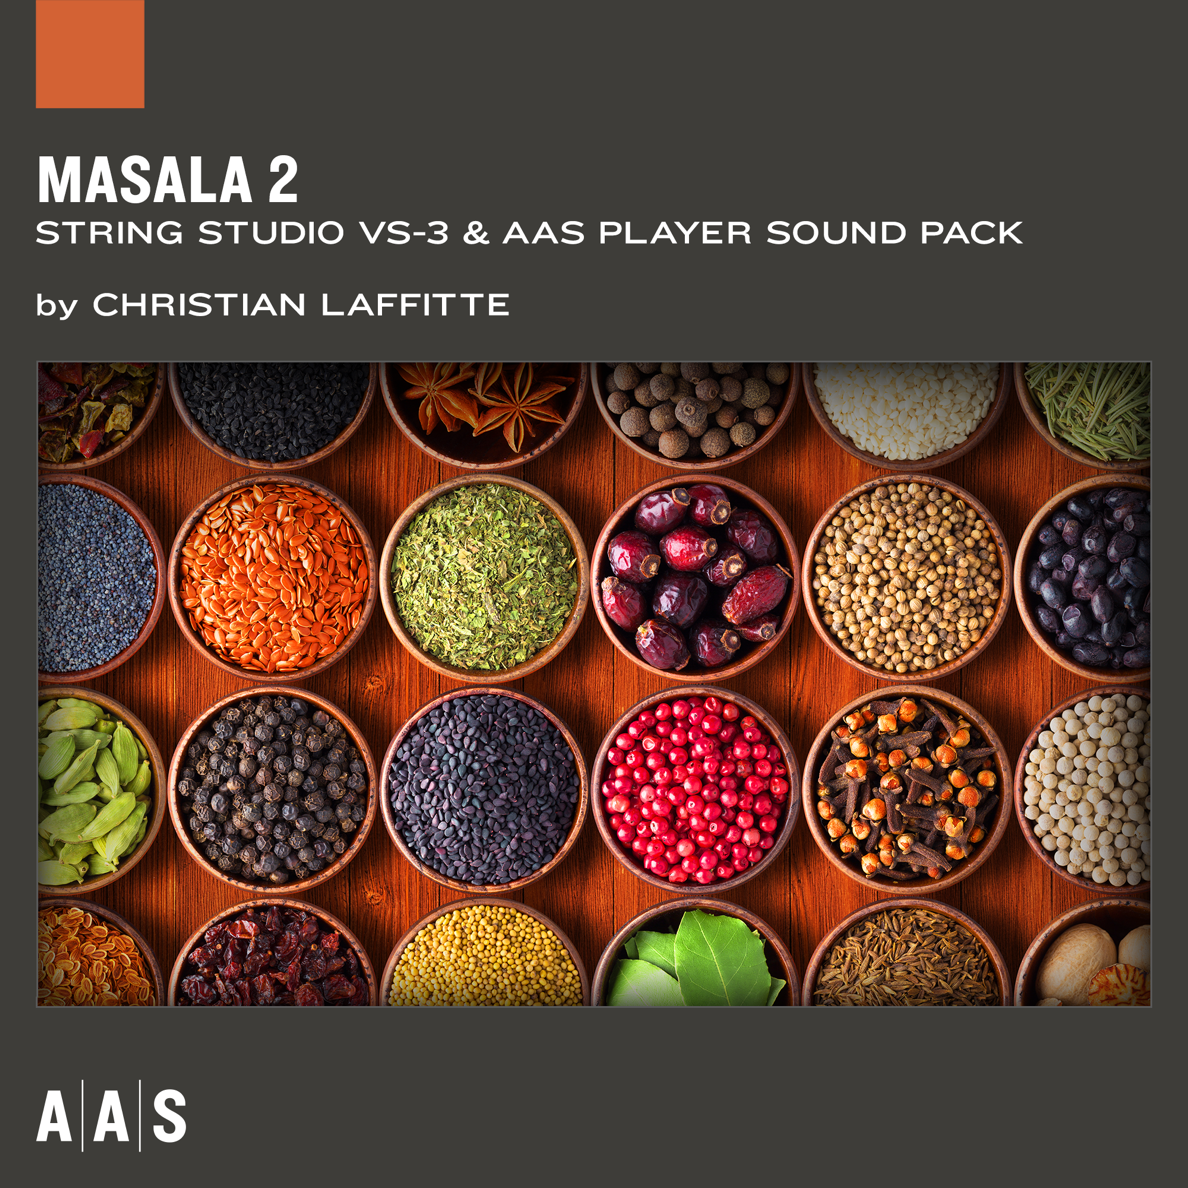 String Studio and AAS Player sound pack ： Masala 2